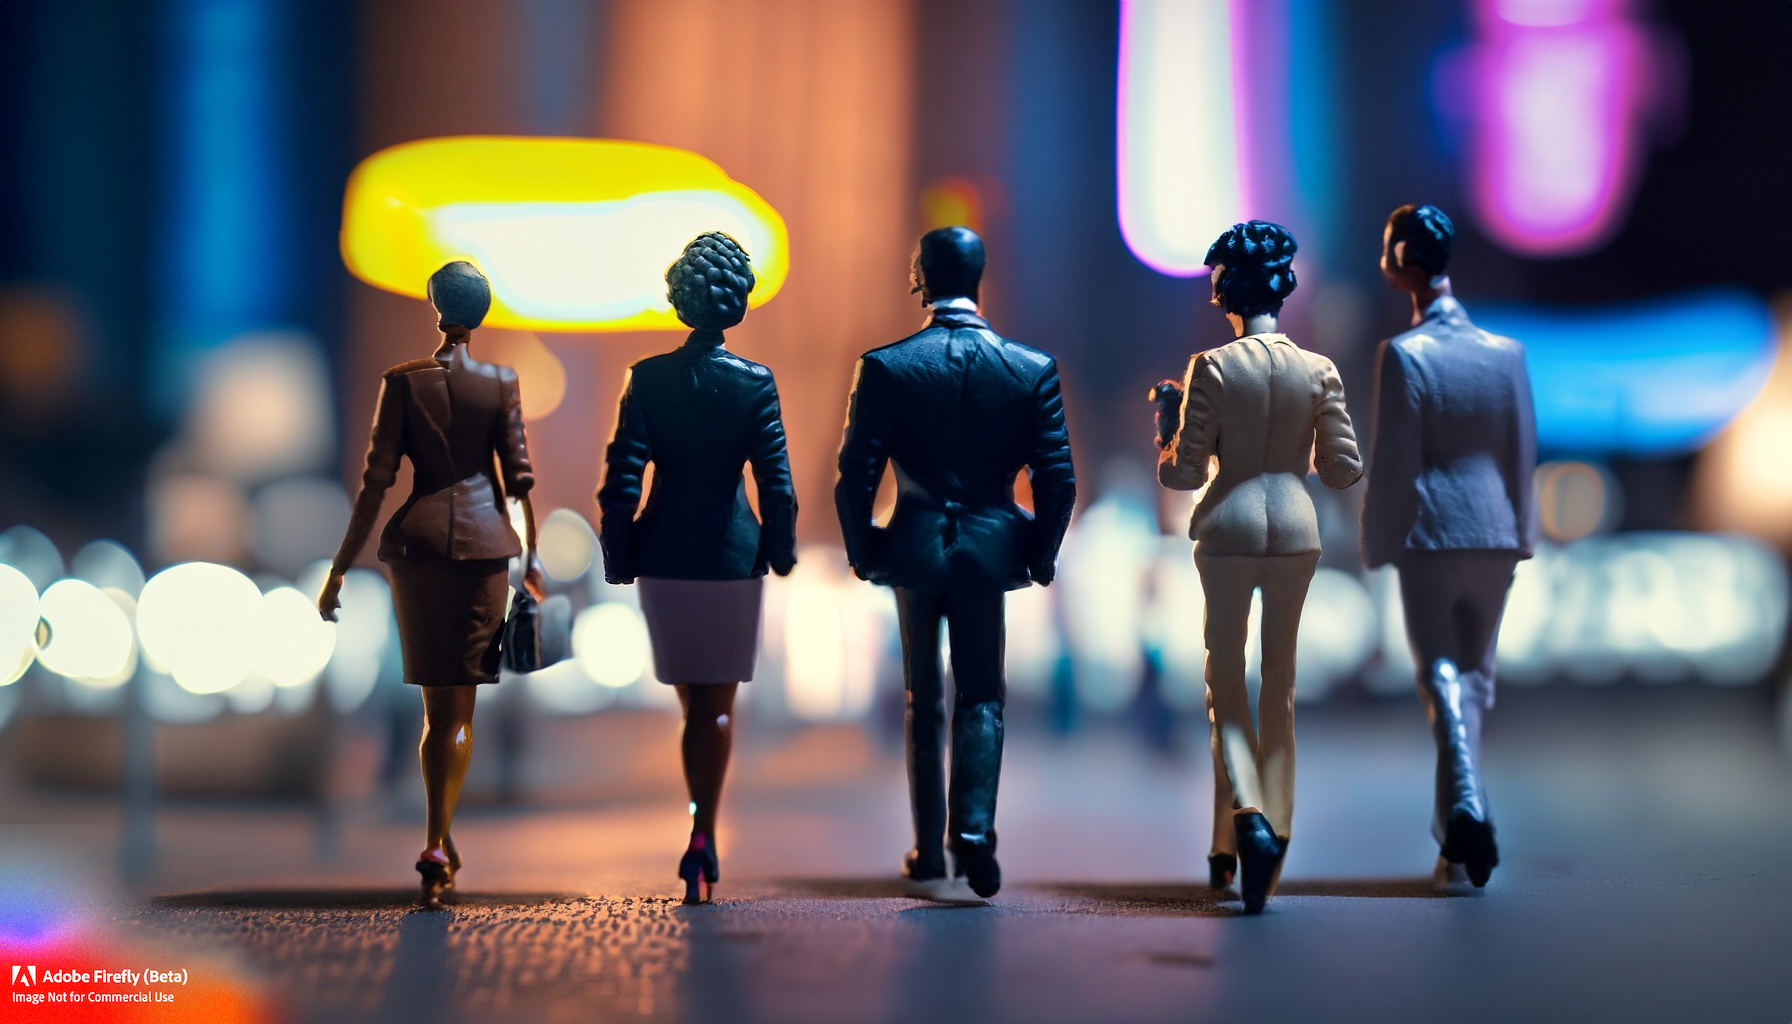 AI generated image of women and men Professional executive toy figures walking on sidewalk in a busy city night